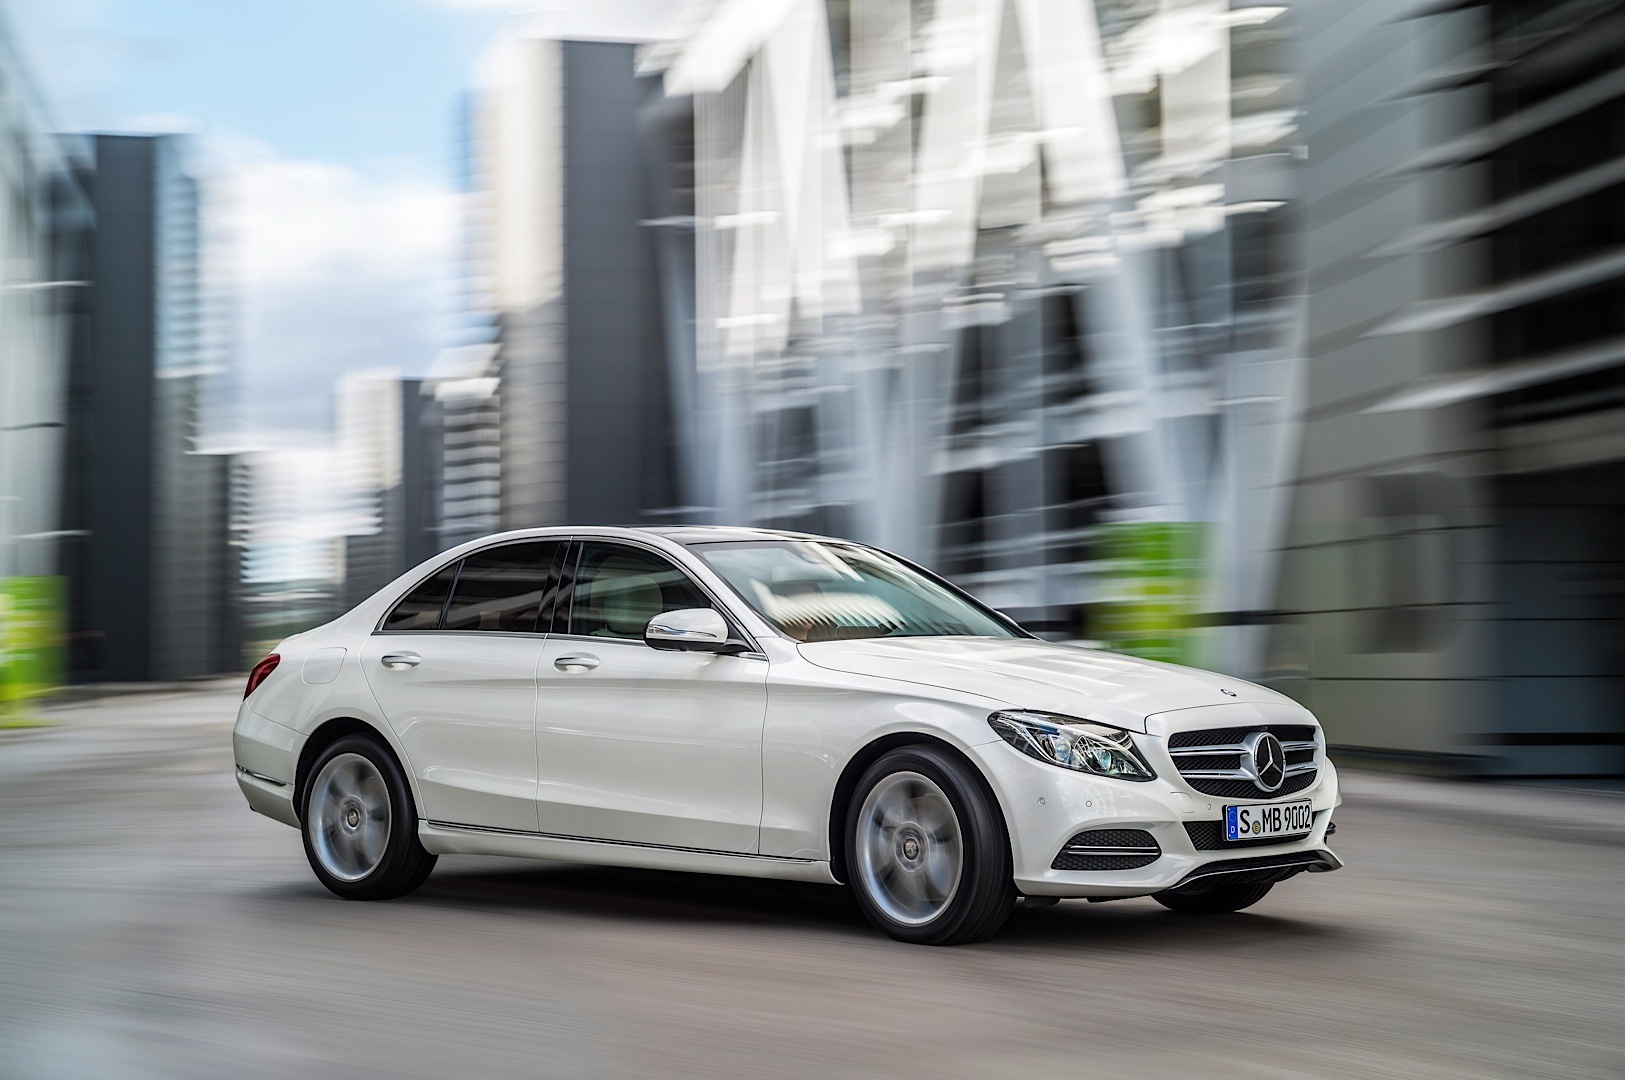 check-out-the-first-official-footage-with-the-new-c-class-w205-video-1080p-61